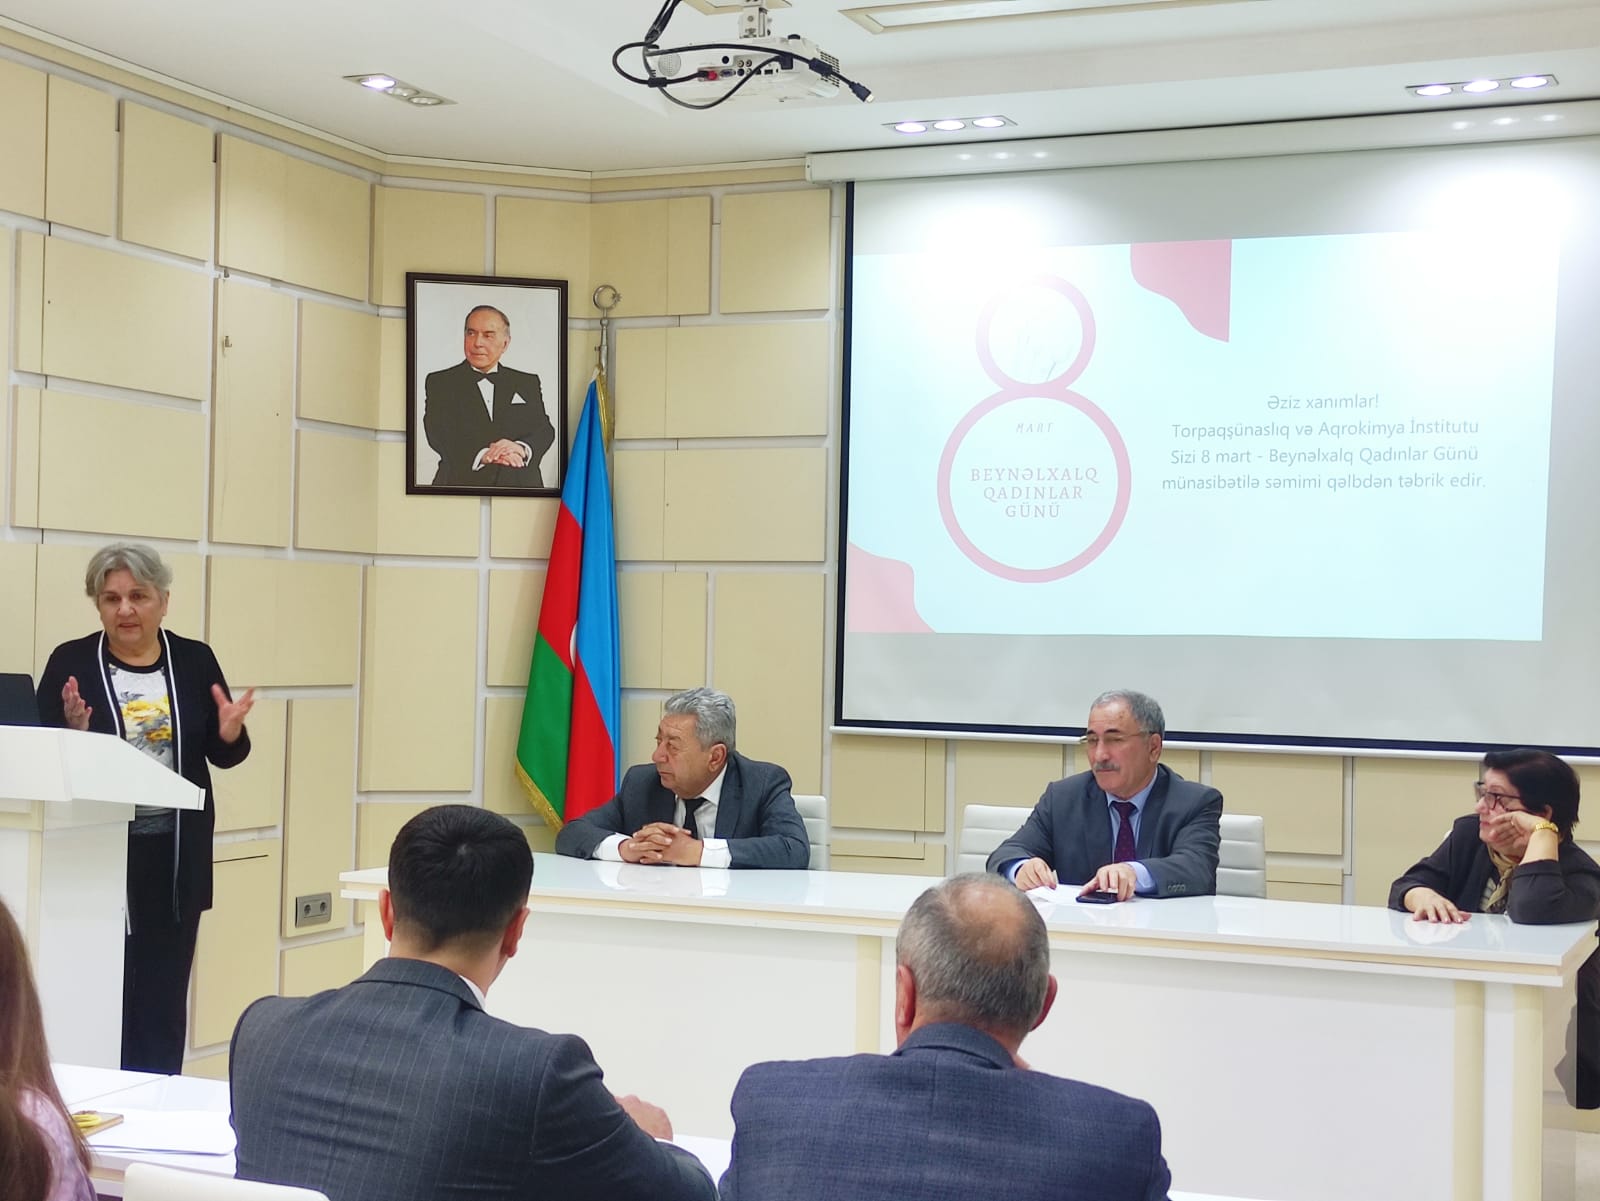 The  event was held on March 8 - International Women's Day at the Institute of Soil Science and Agrochemistry of the Ministry of Science and Education of the Republic of Azerbaijan.